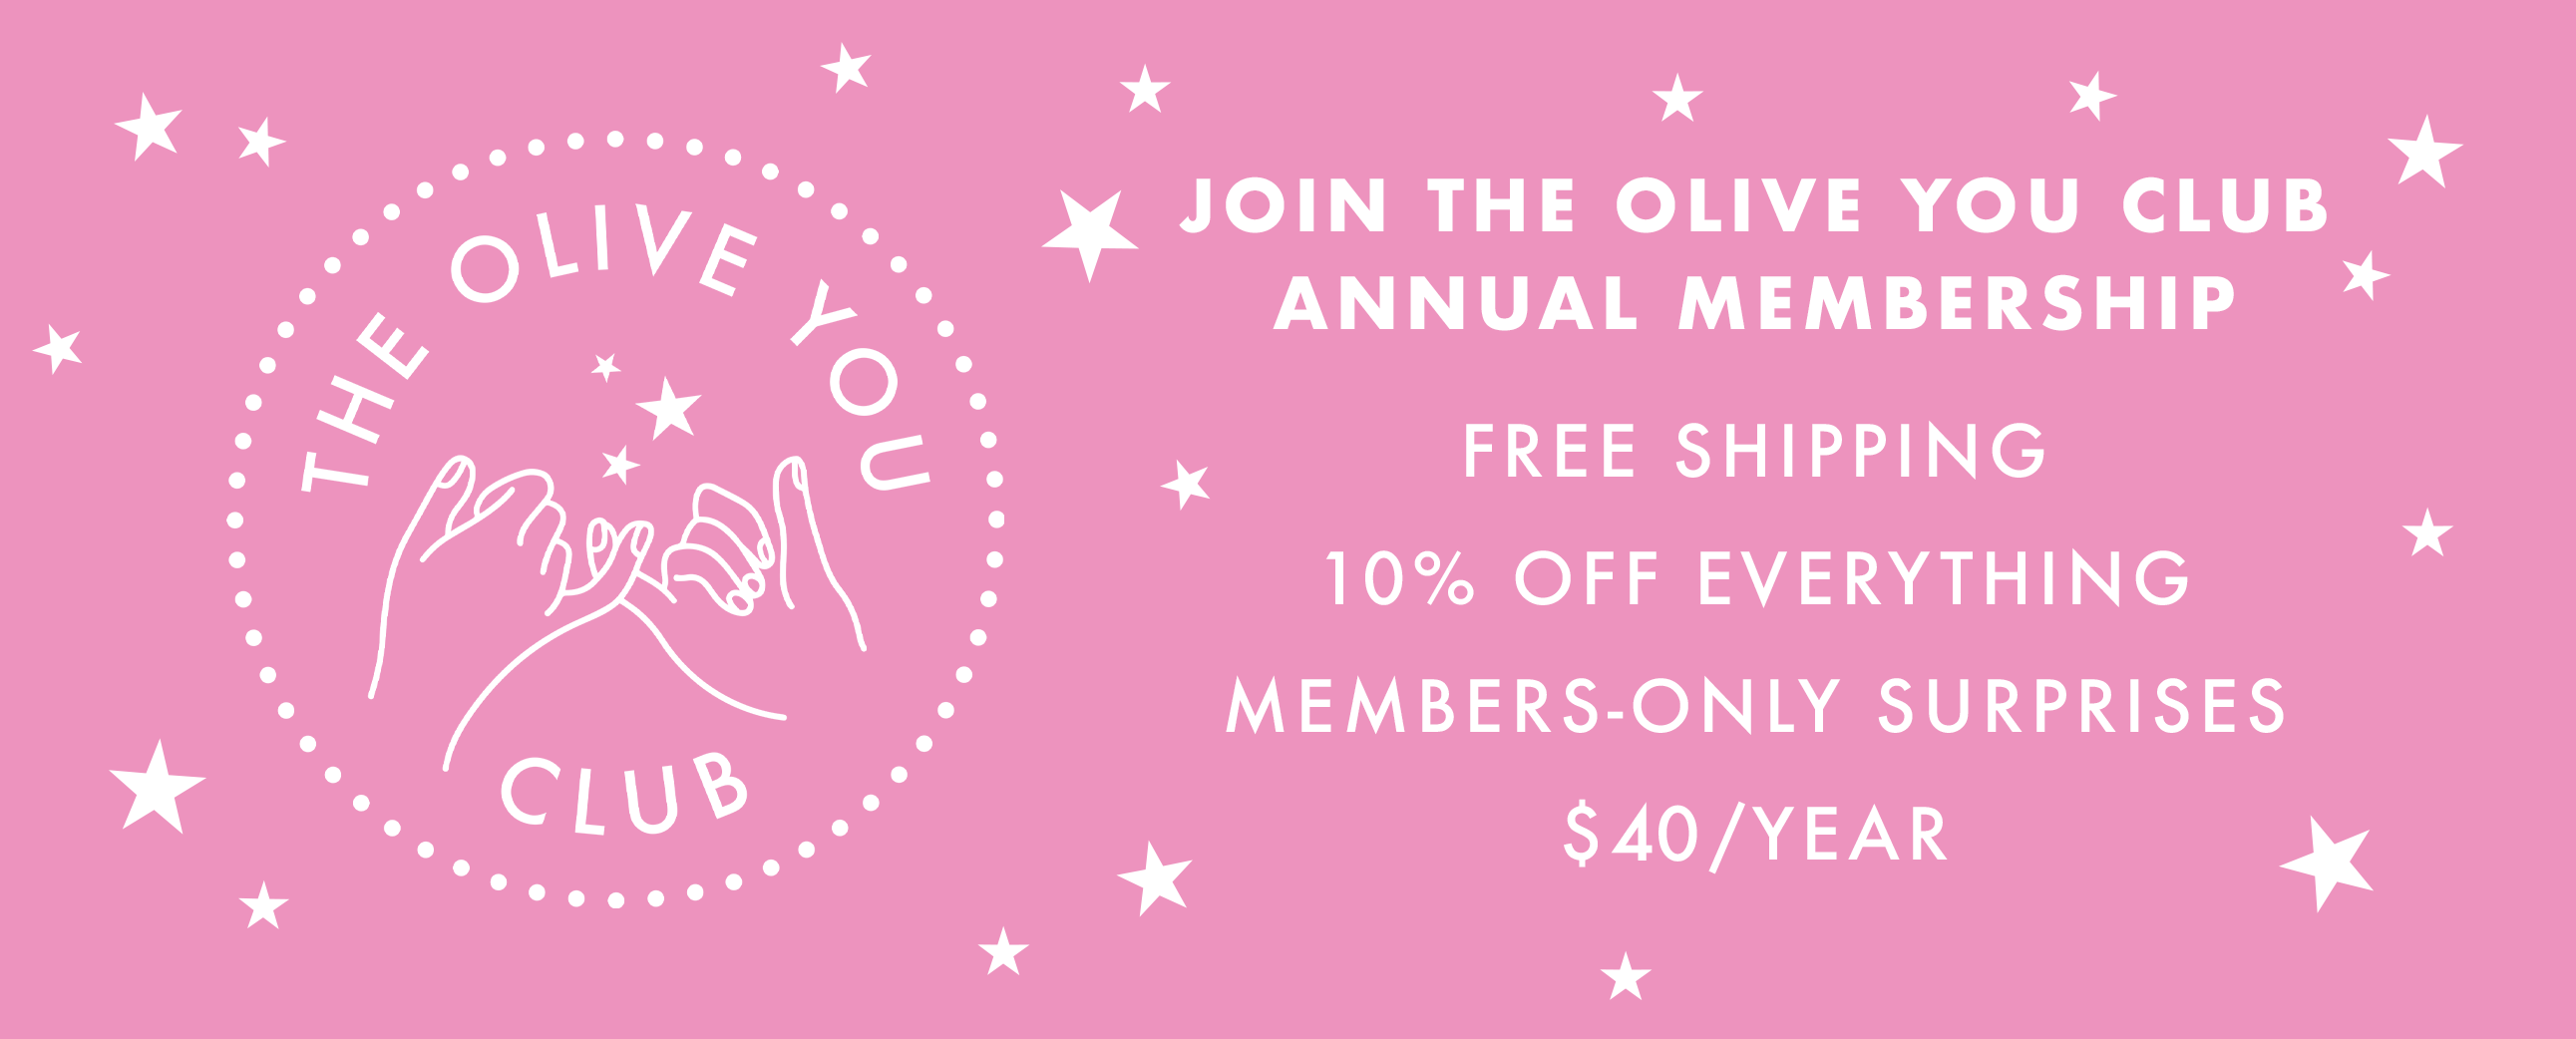 join the olive you club annual membership free shipping, 10% off everything, members only surprises, $40 per year